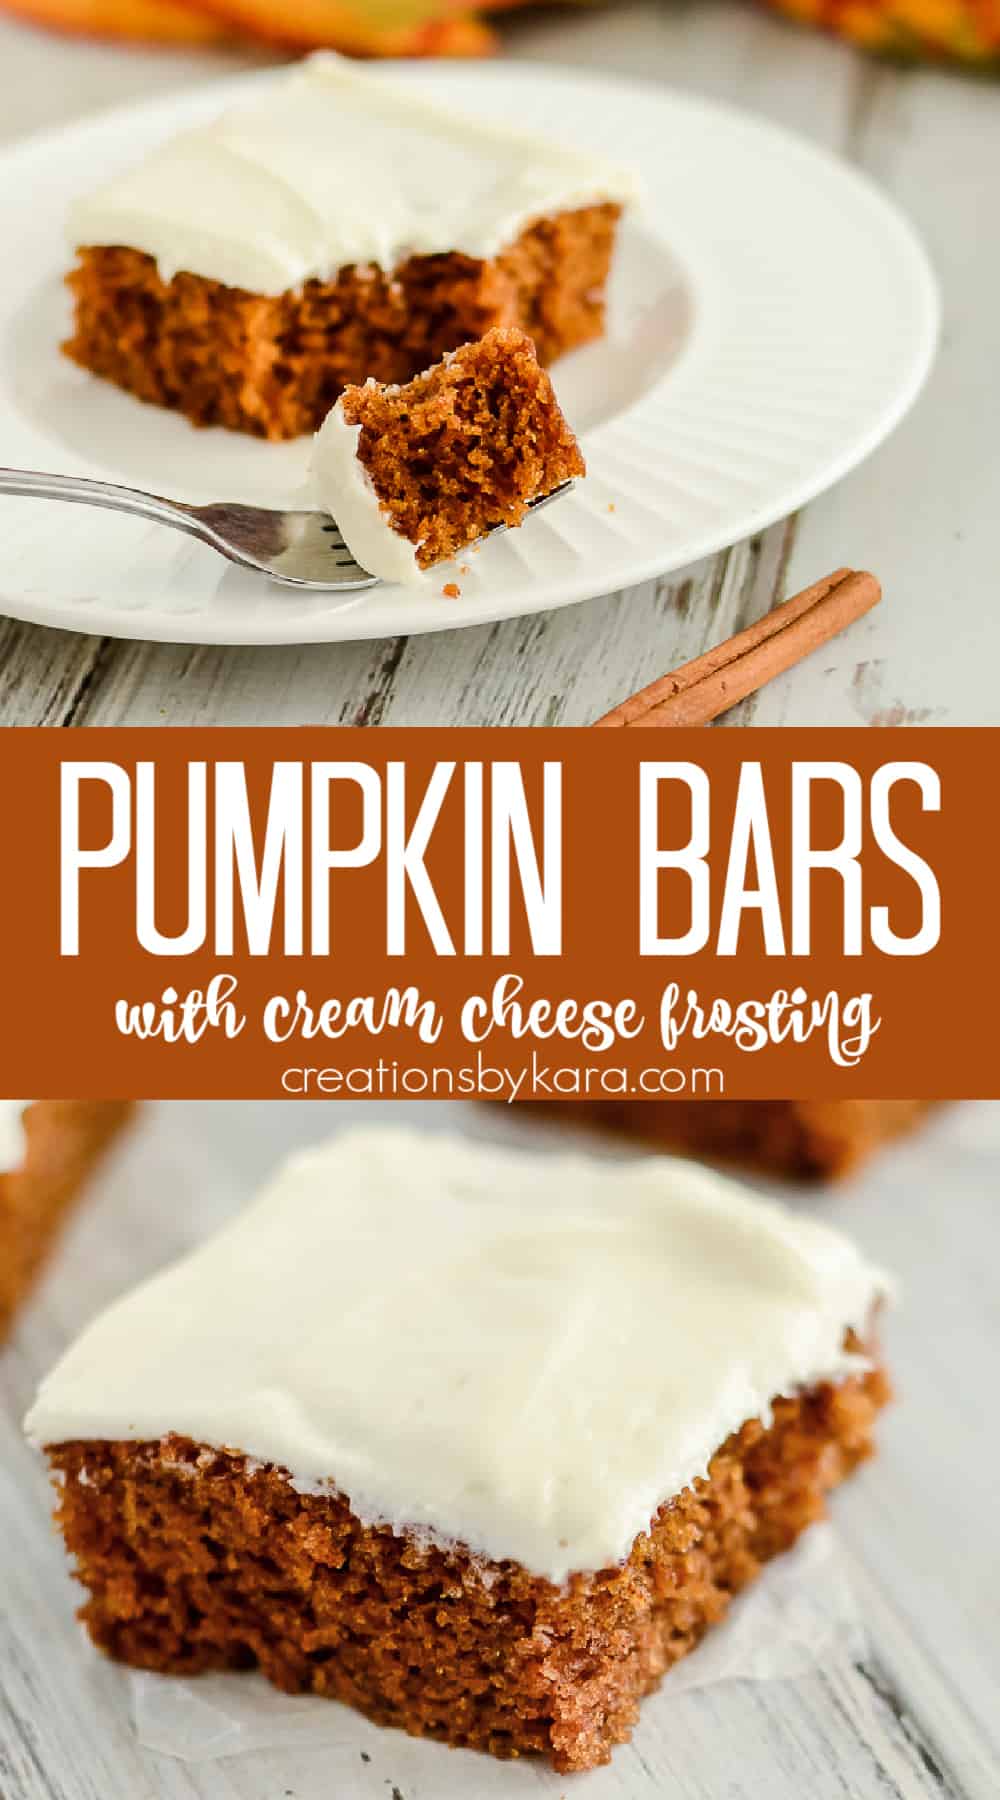 Pumpkin Bars with Cream Cheese Frosting - Creations by Kara